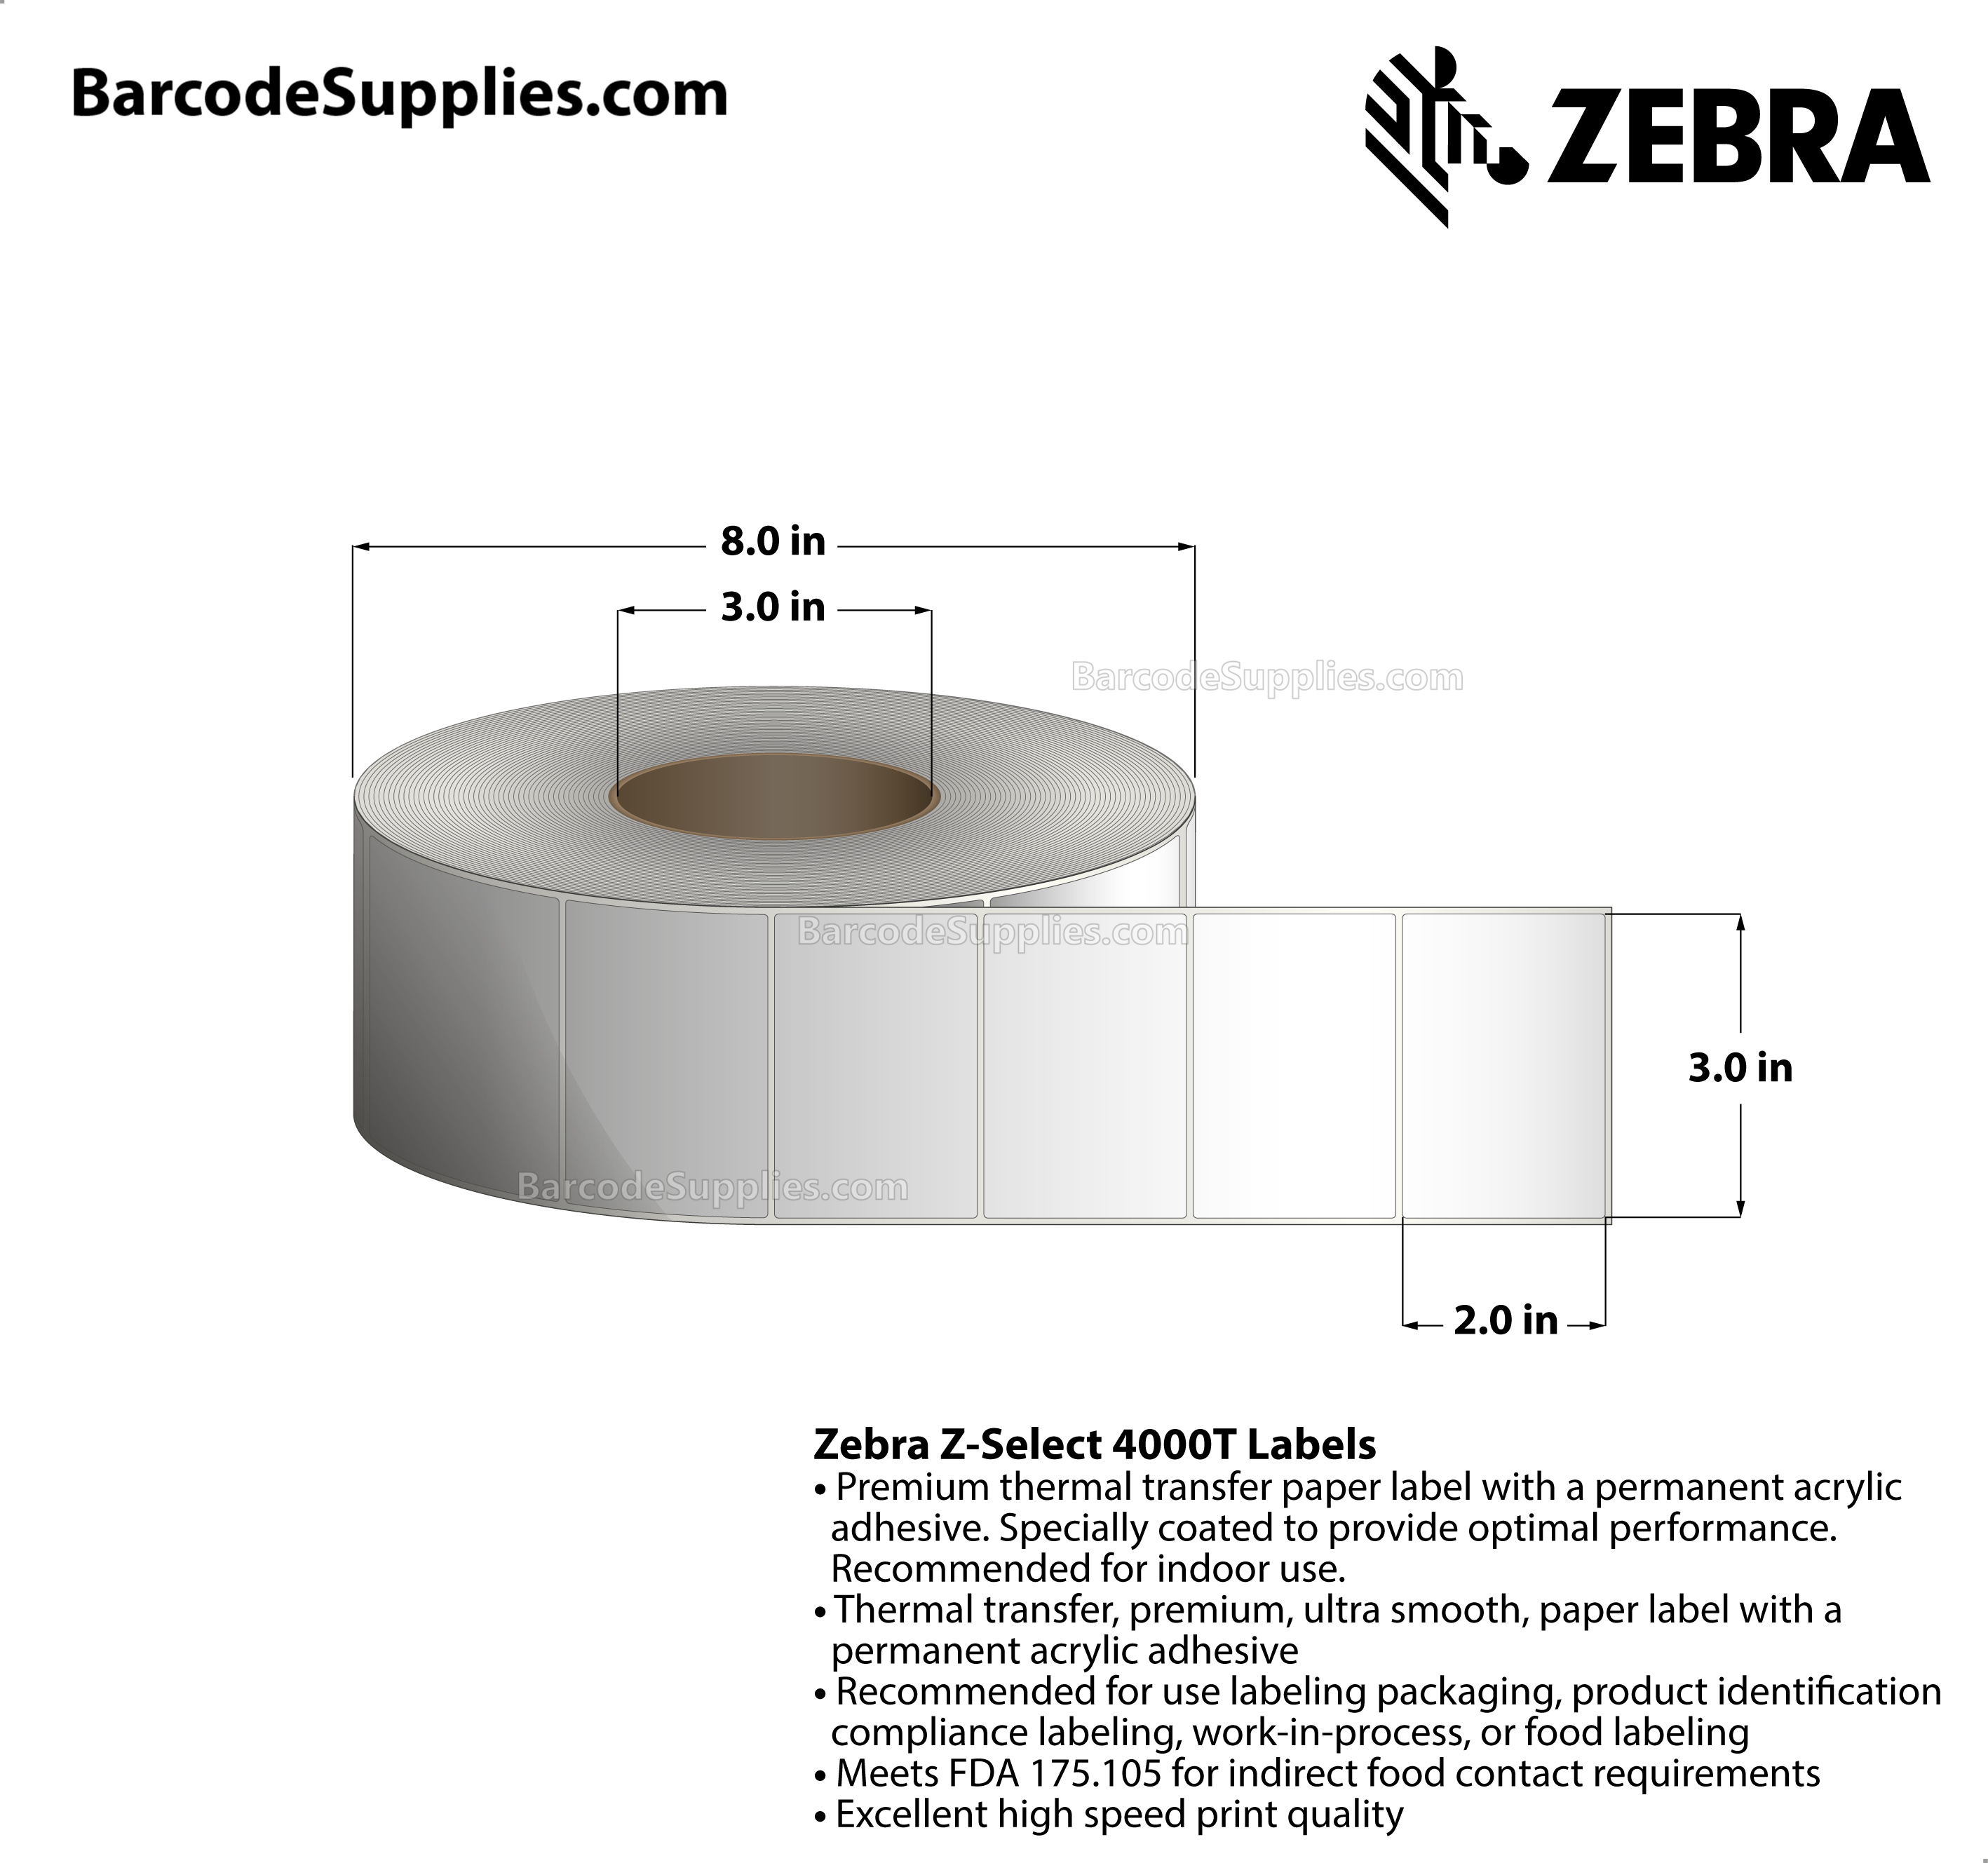 3 x 2 Thermal Transfer White Z-Select 4000T Labels With Permanent Adhesive - Not Perforated - 2740 Labels Per Roll - Carton Of 6 Rolls - 16440 Labels Total - MPN: 72285